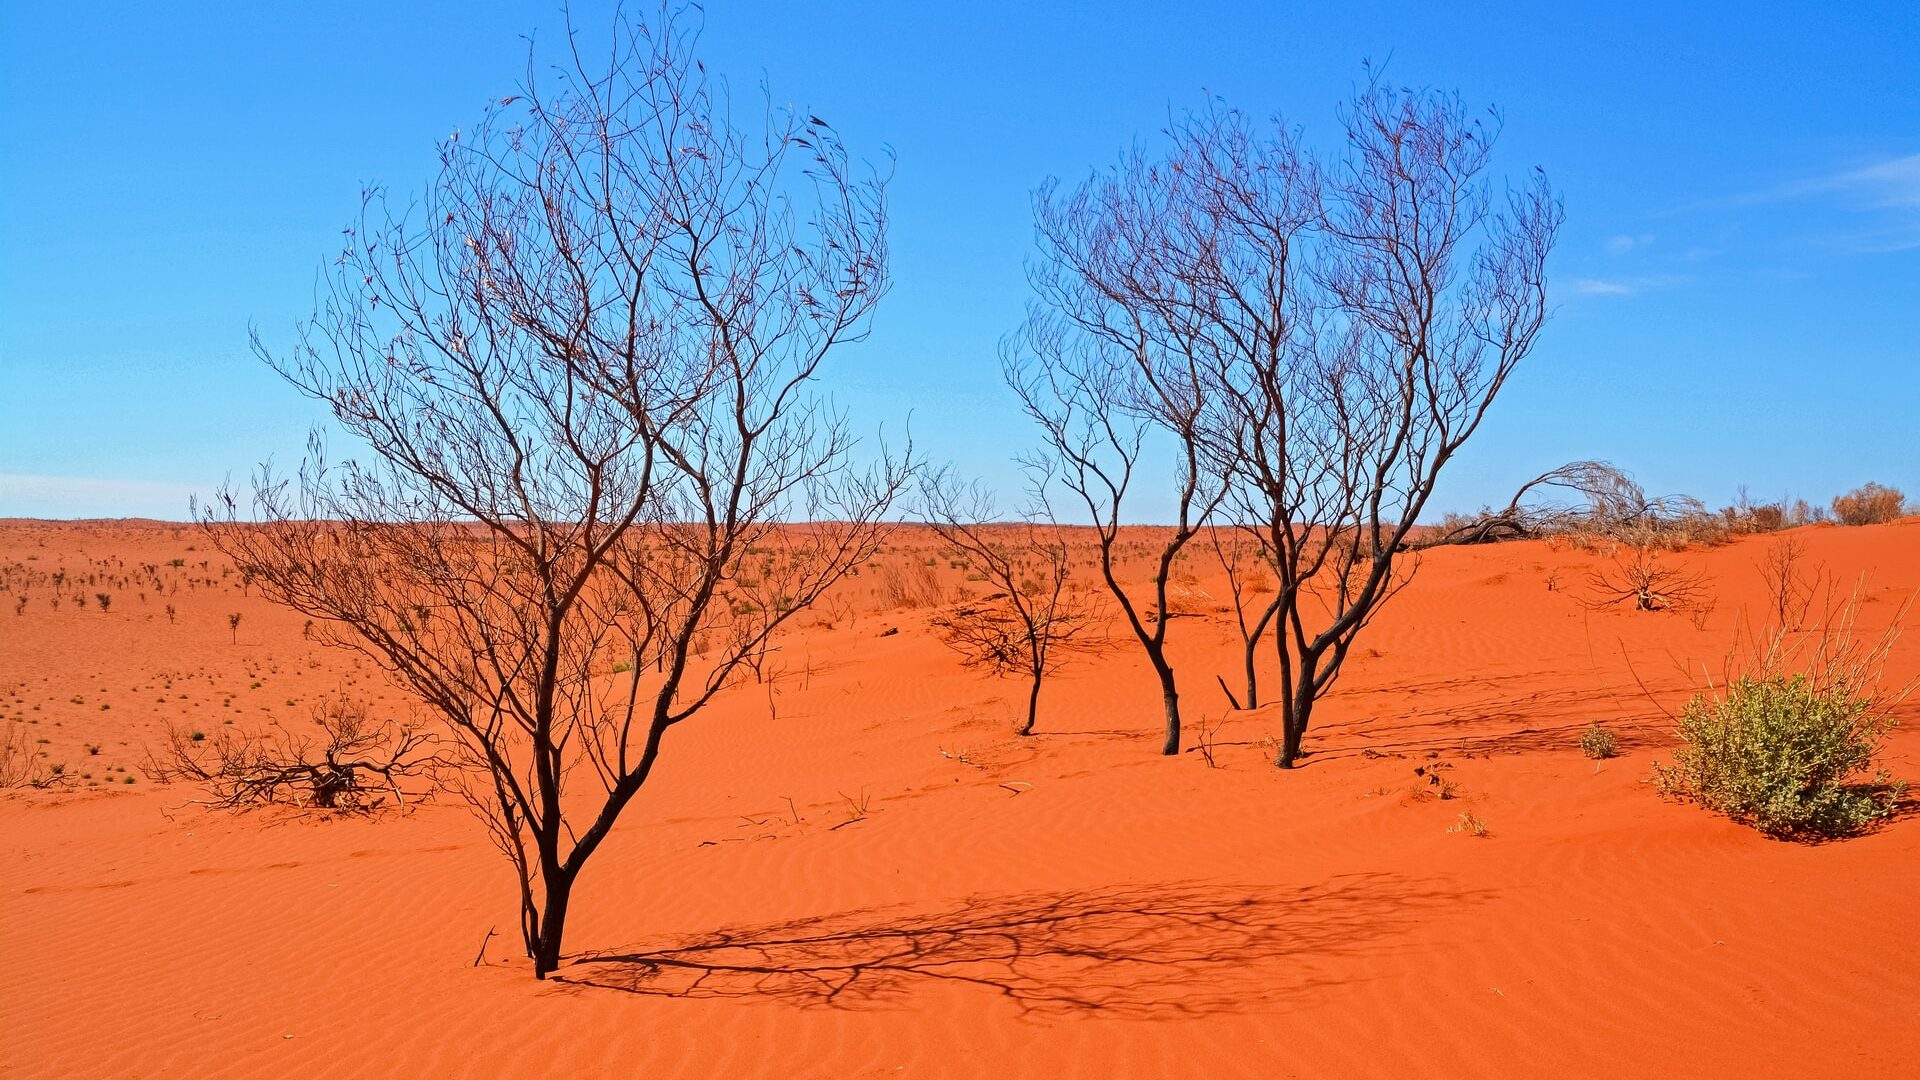 A bright blue sky and the orange barren earth of the Australian outback. Two dry, bare trees are featured in the foreground.